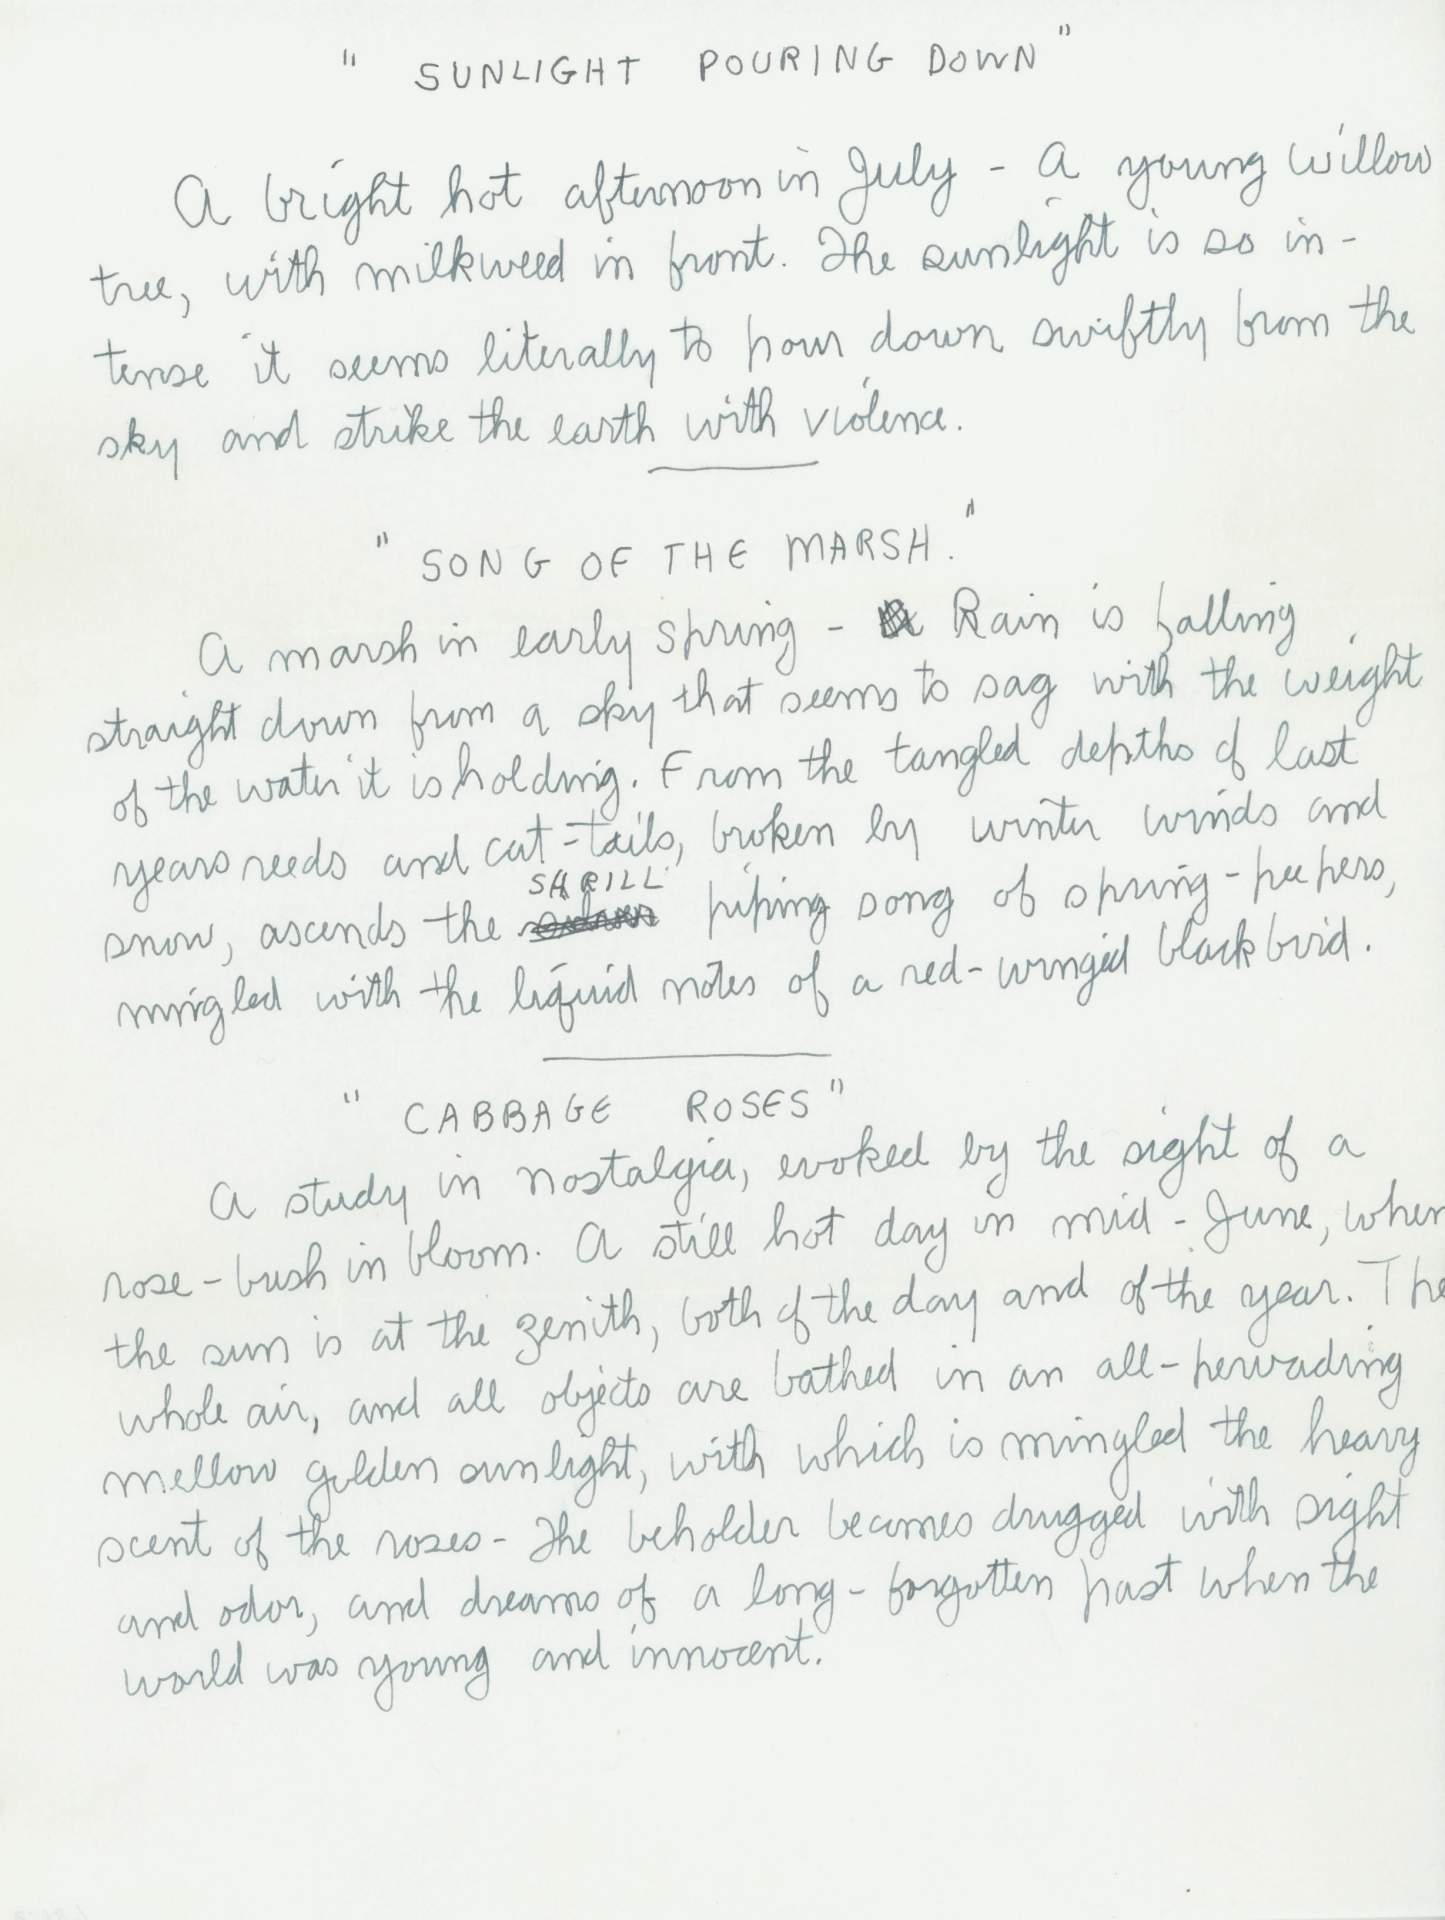 Letter from Charles Burchfield to Frank Rehn